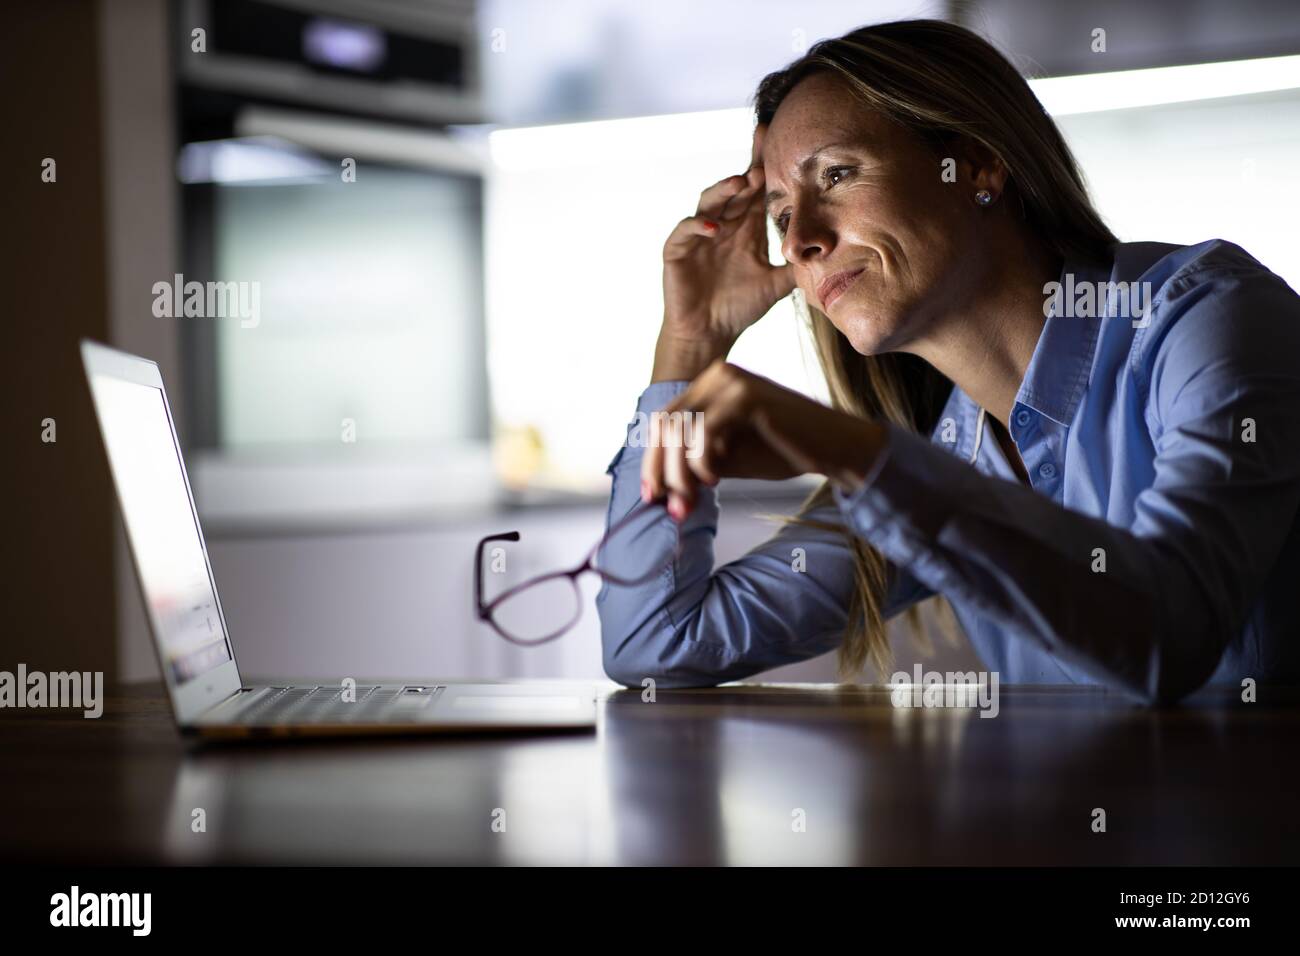 Pretty, middle-aged woman working late in the day on a laptop computer at home, running a business from home/working remotely for a corporation Stock Photo